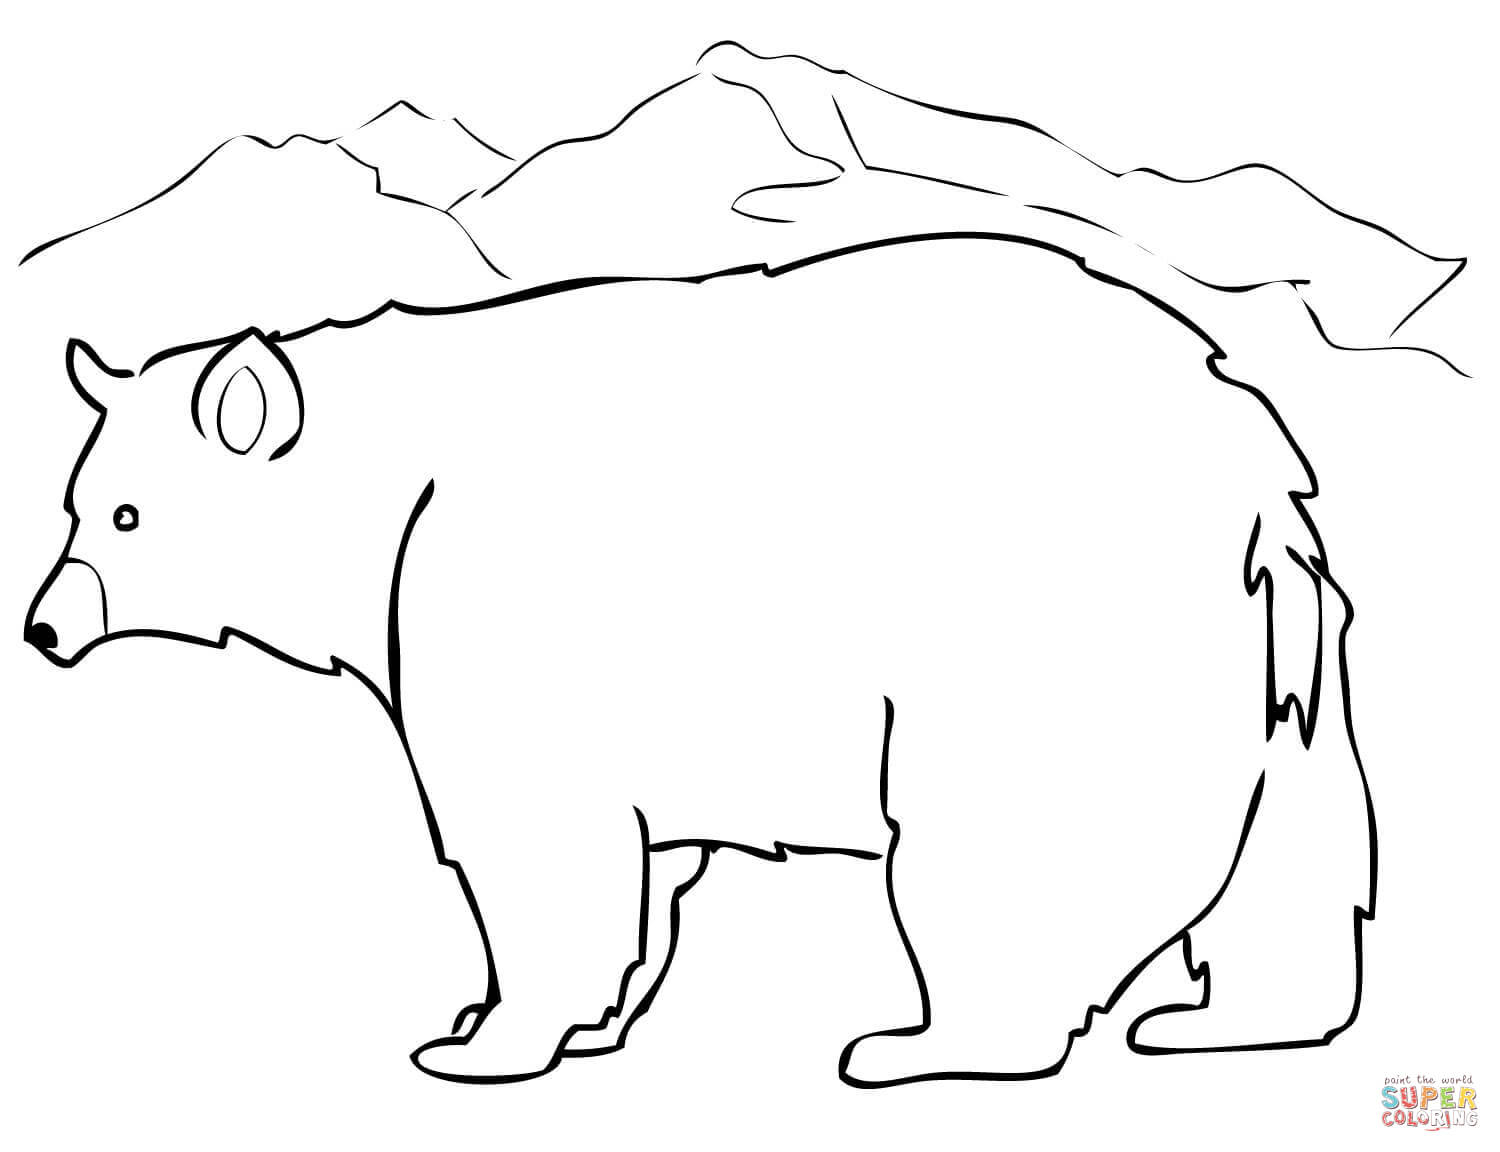 Coloring Pages Of Black Bears Black Bear Coloring Page Free Printable Coloring Pages